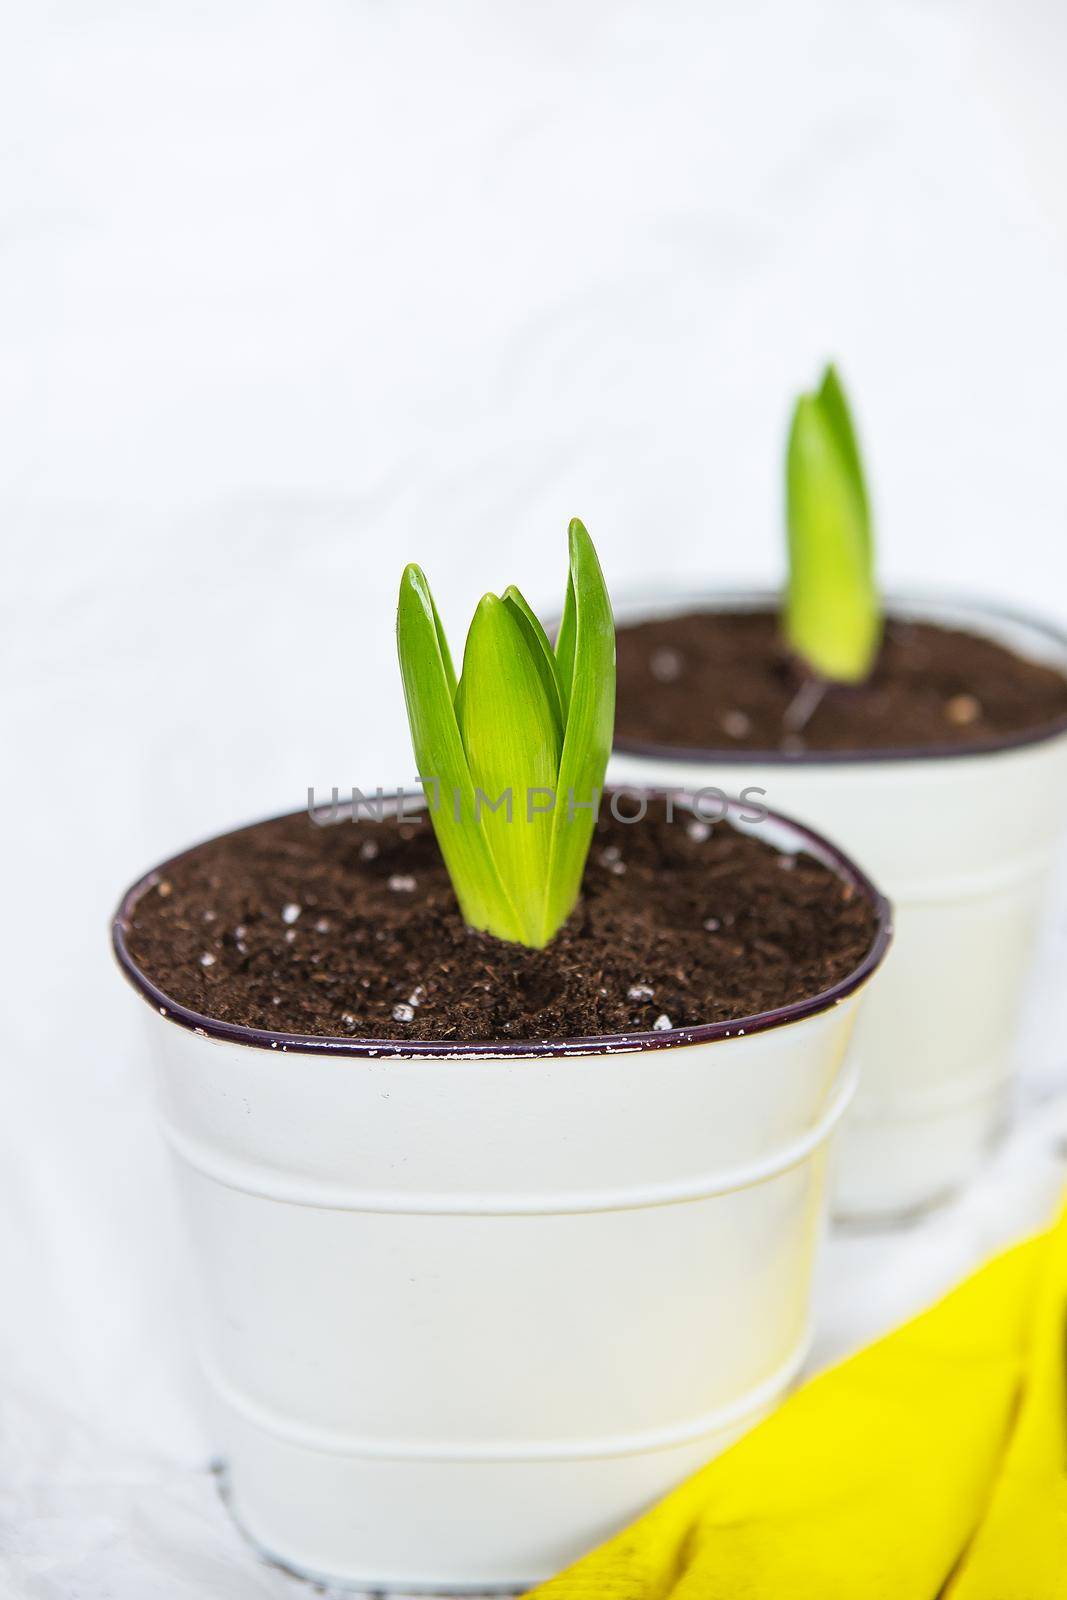 Transplanting hyacinth bulbs into pots, gardening tools lie in the background, yellow gloves. Gardening concept, close-up